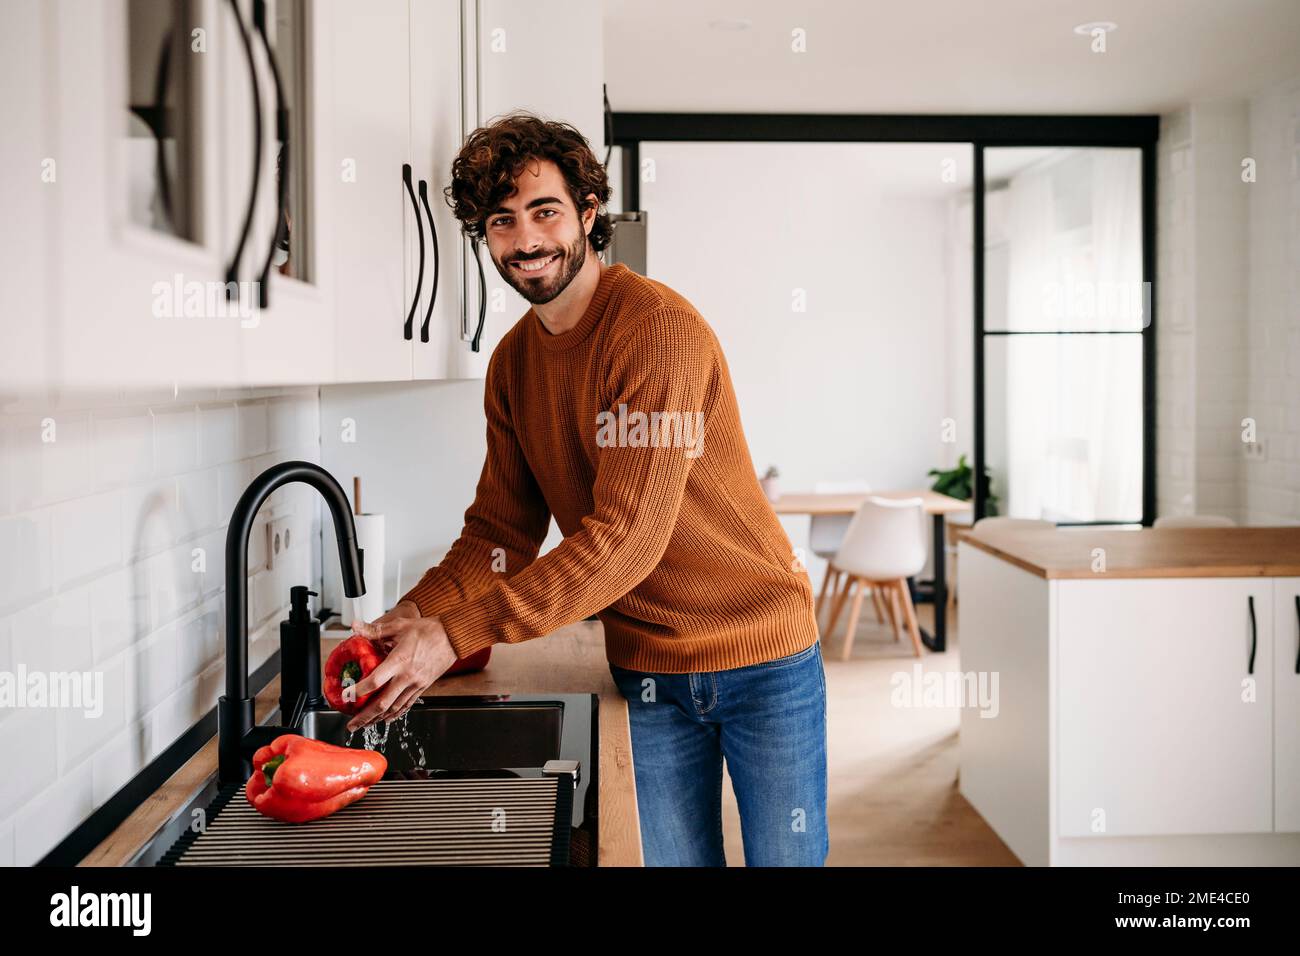 Smiling young man washing red bell pepper at home Stock Photo